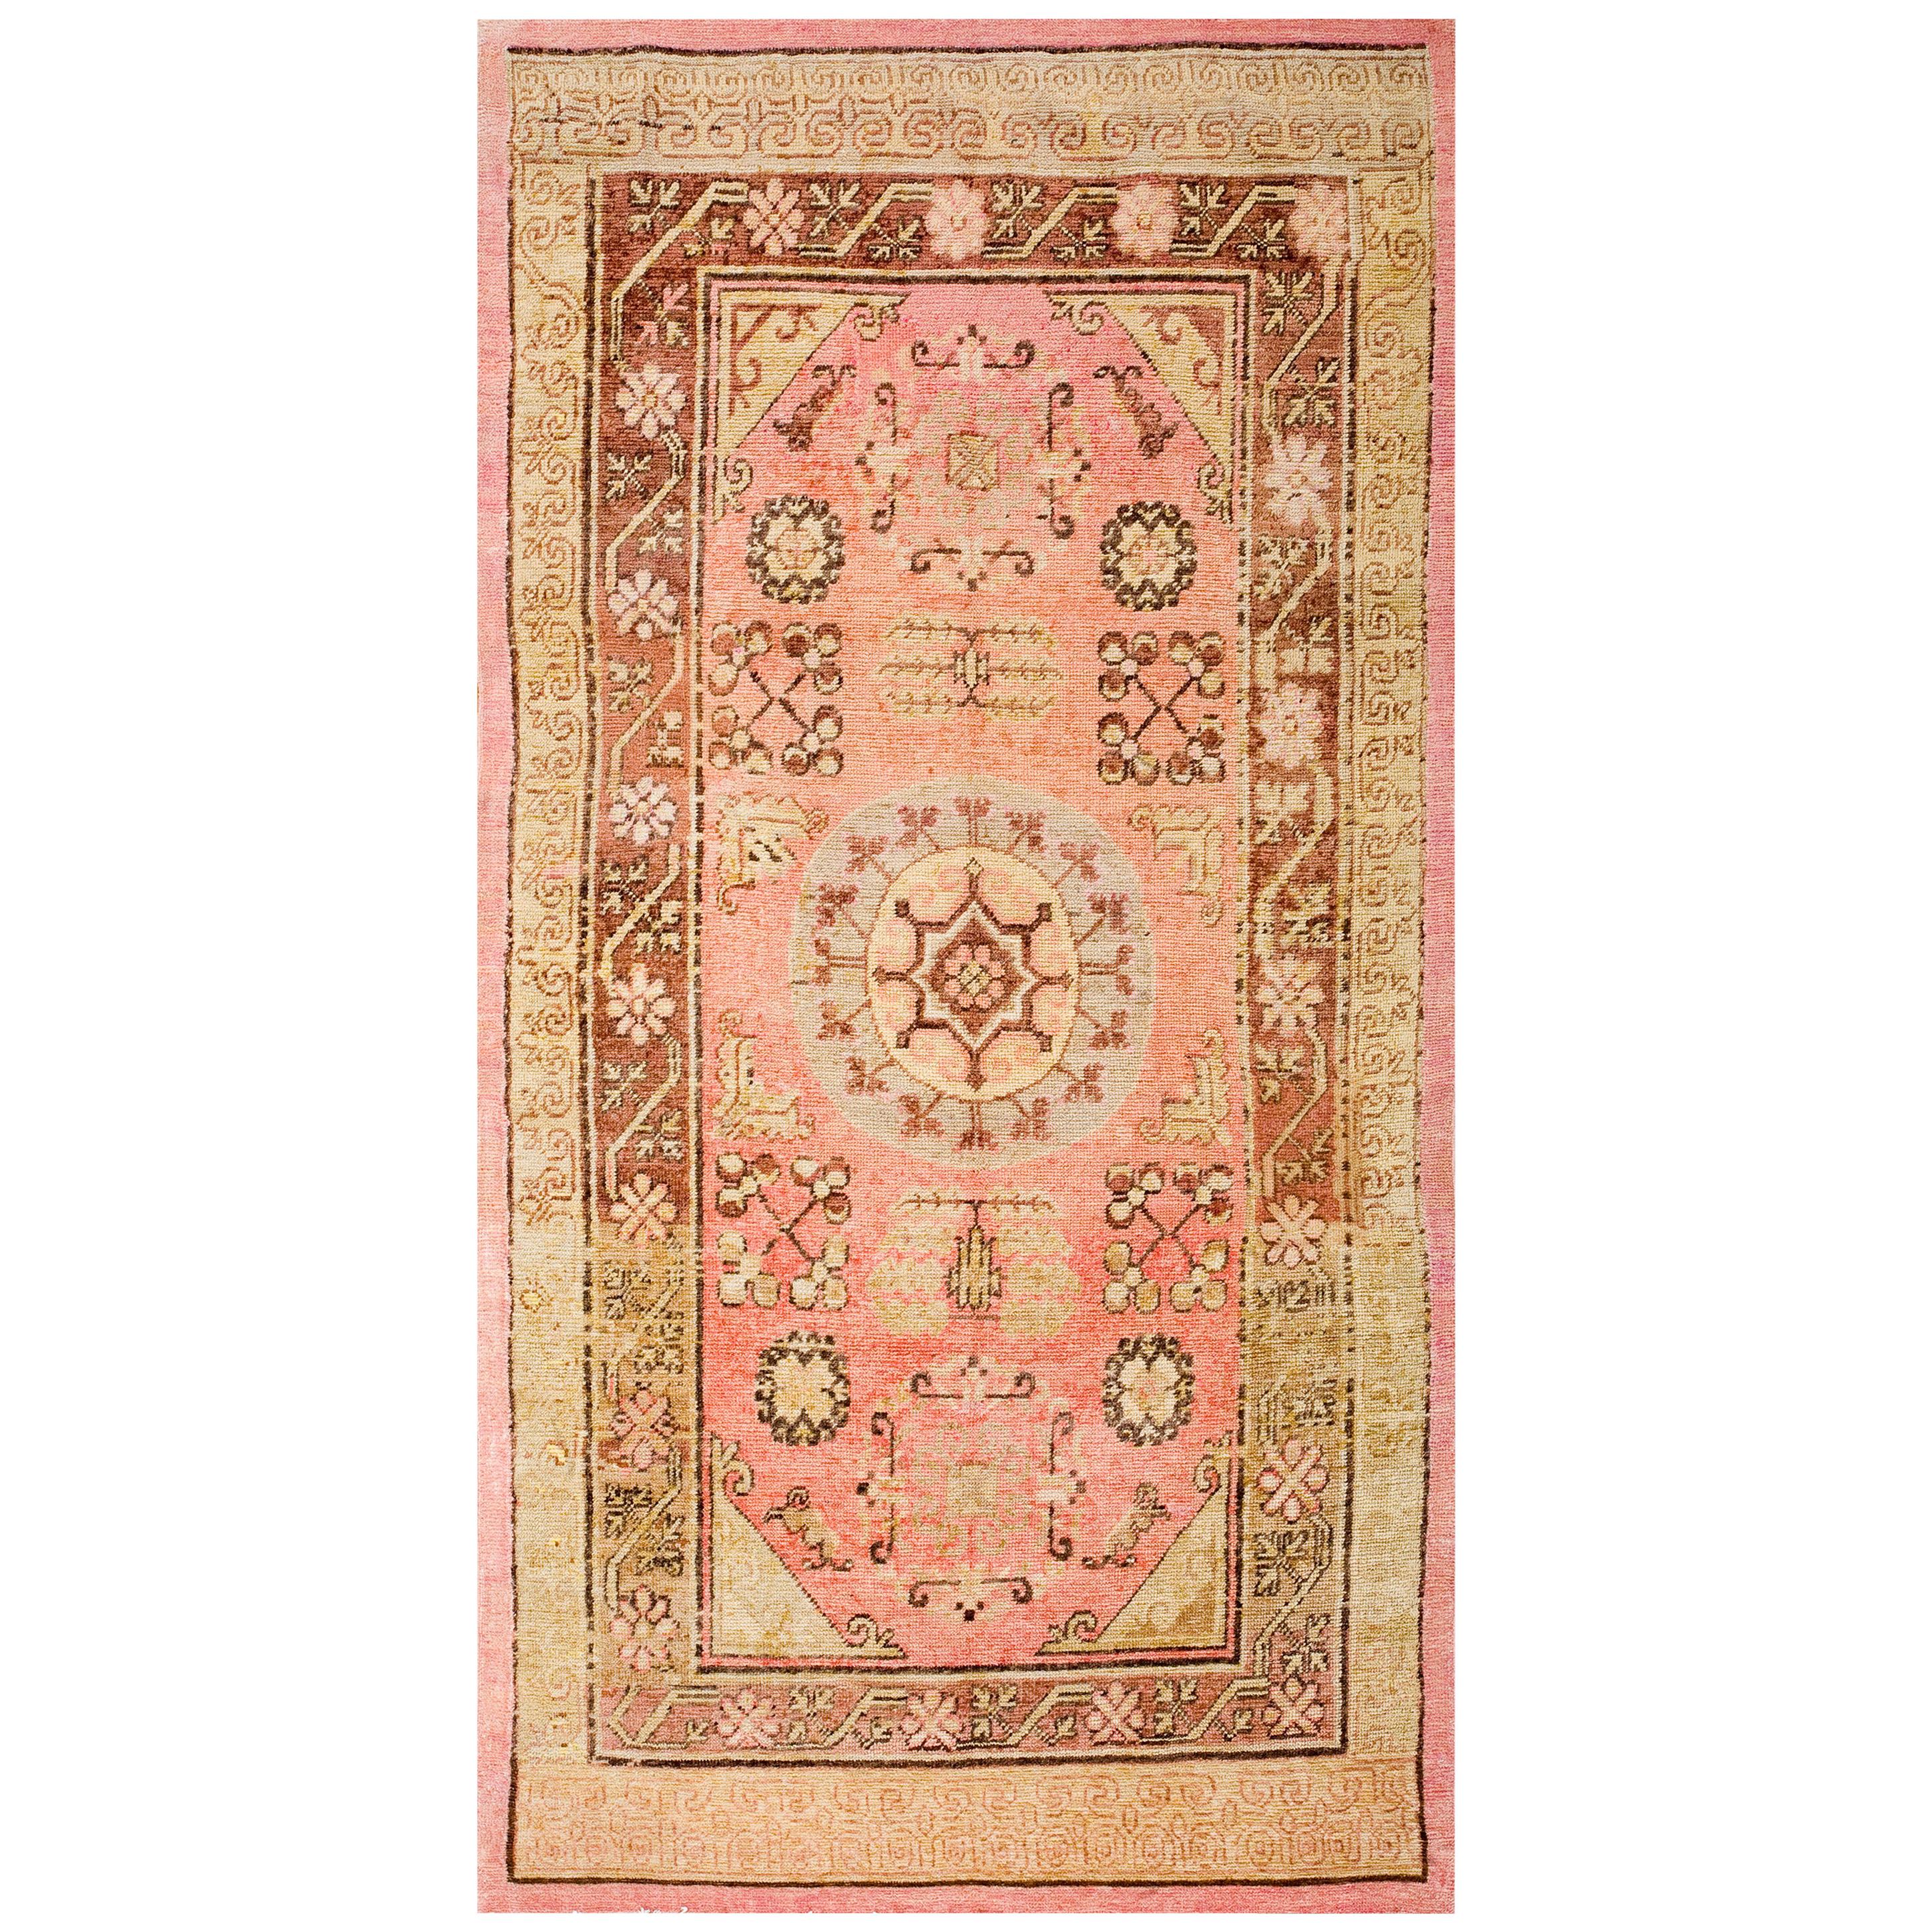 Early 20th Century Central Asian Khotan Rug ( 4'2" x 8' - 127 x 244 ) For Sale